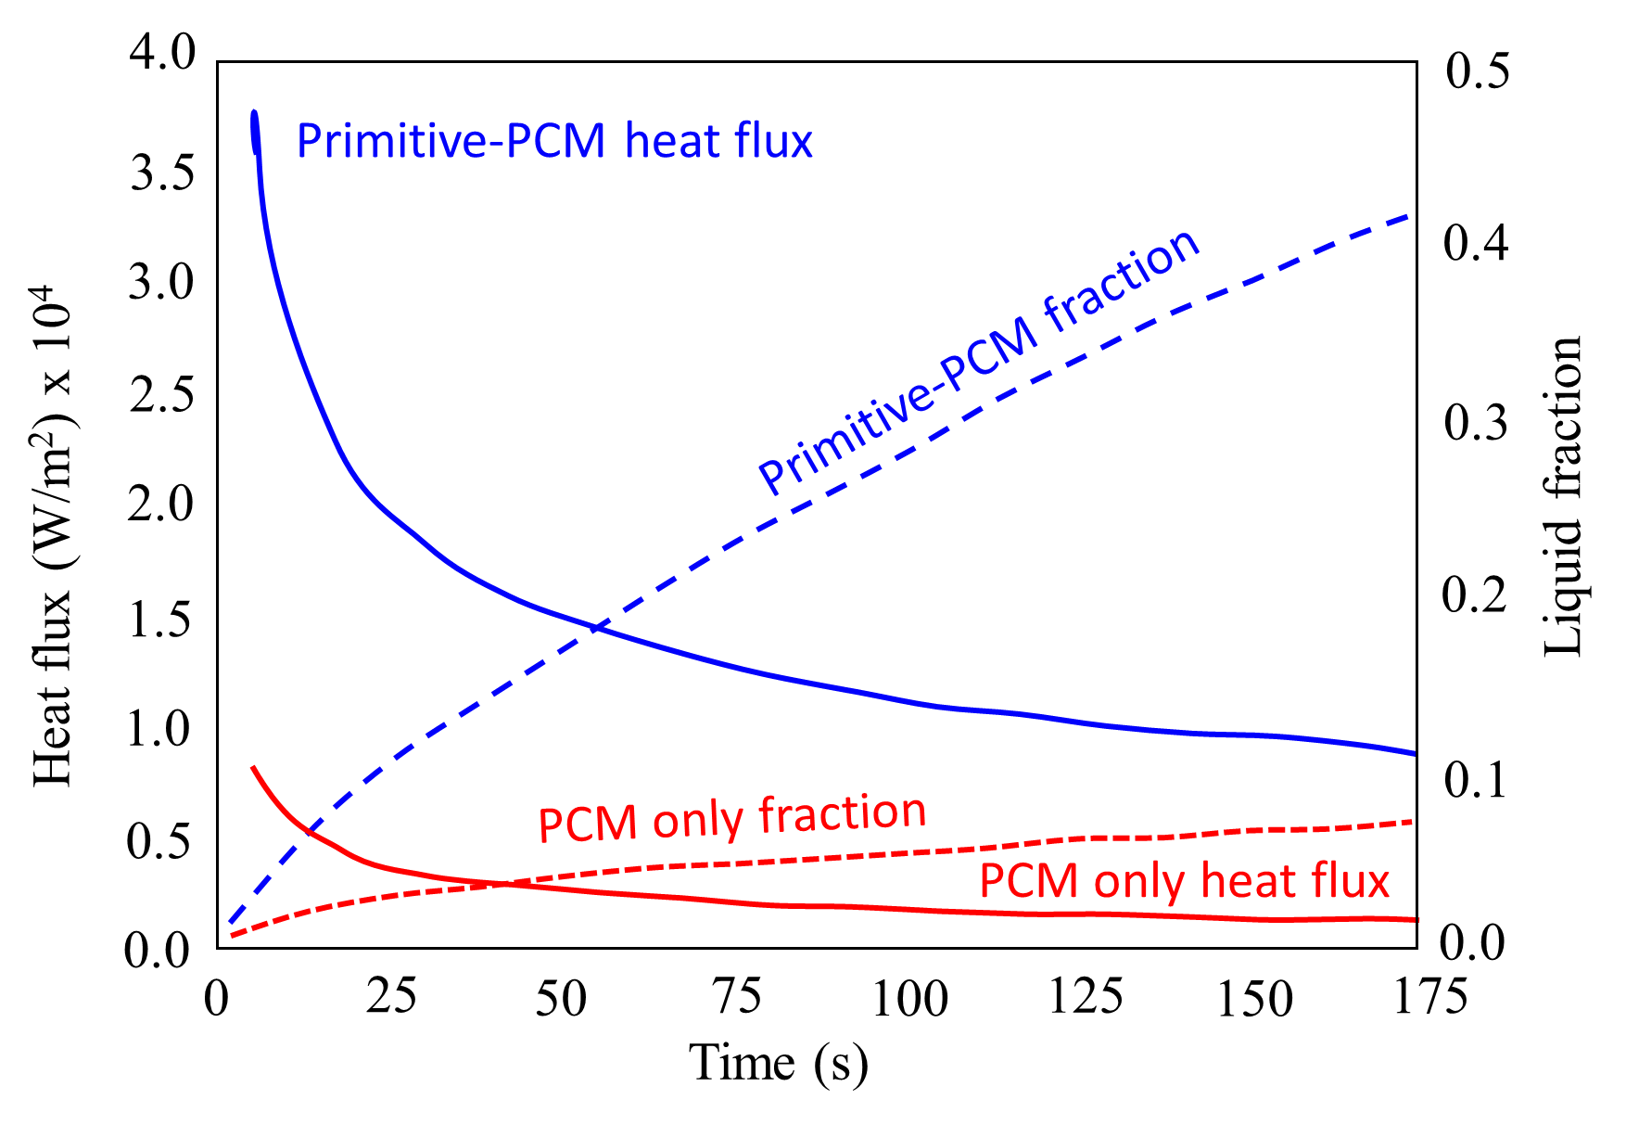 Comparisons of heat flux and liquid fraction for PCM only and Primitive PCM, adapted from [36].